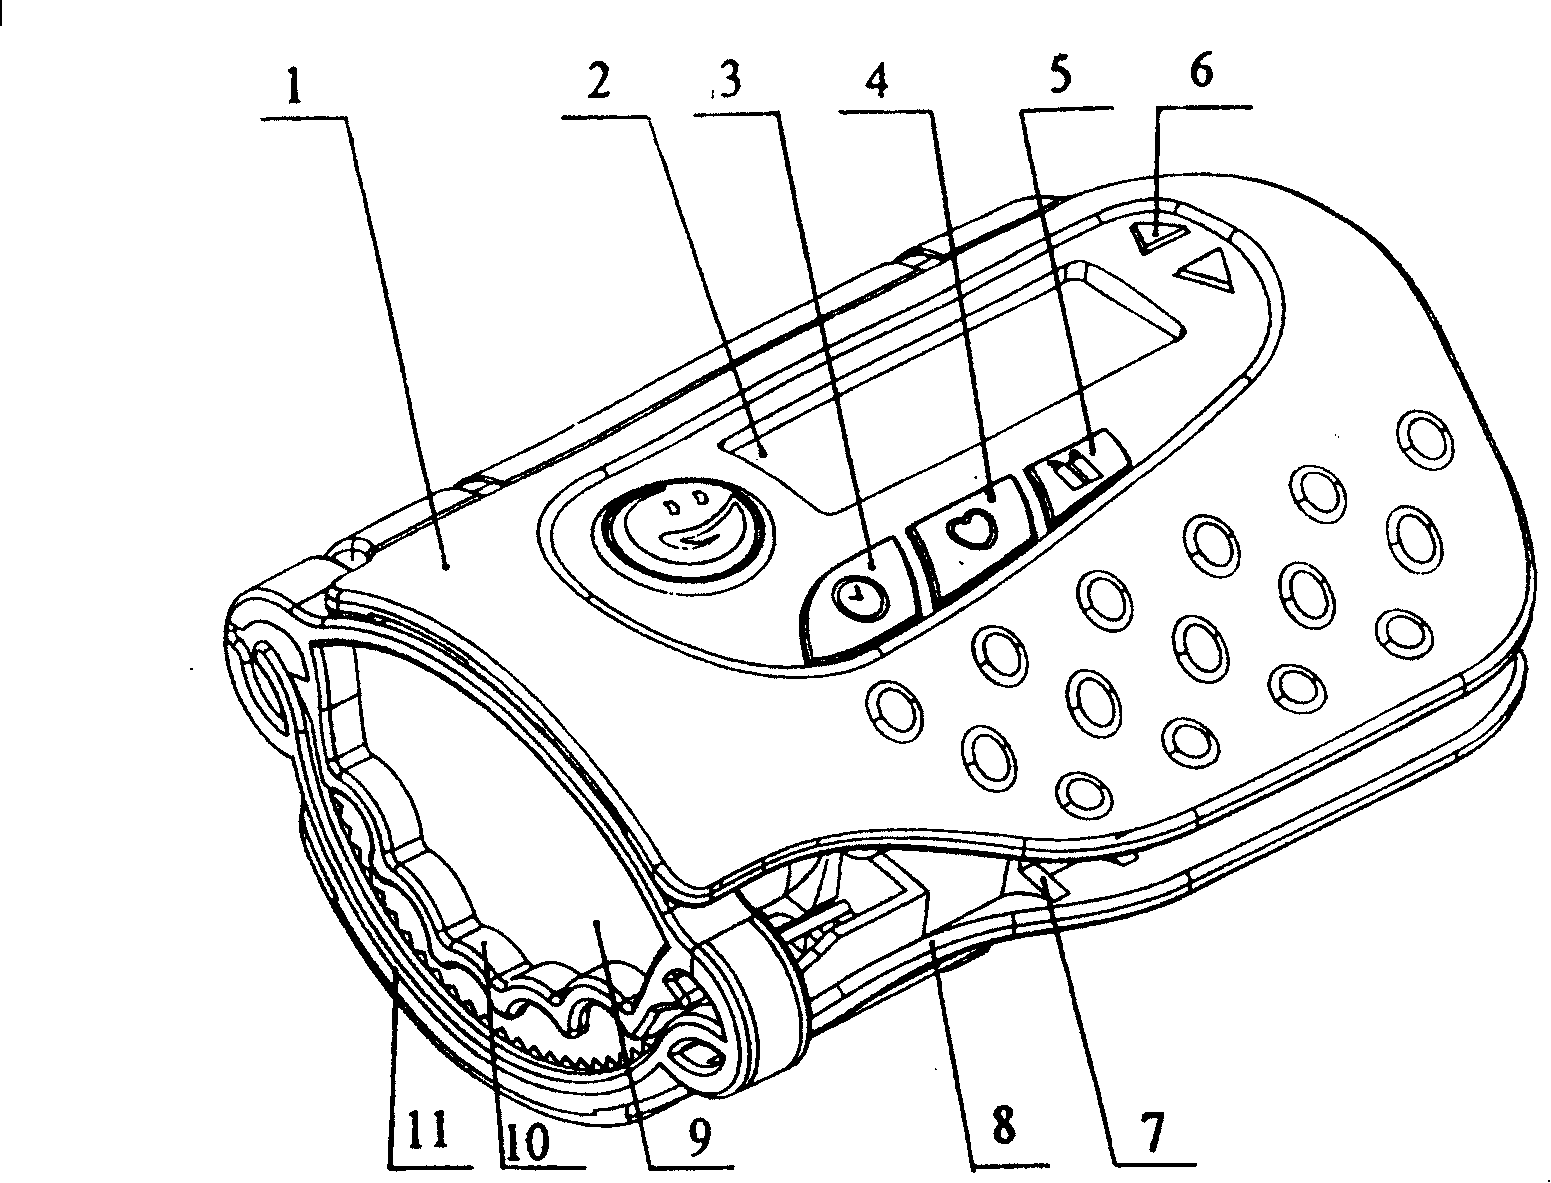 Clip cutter with display for umbilical cord